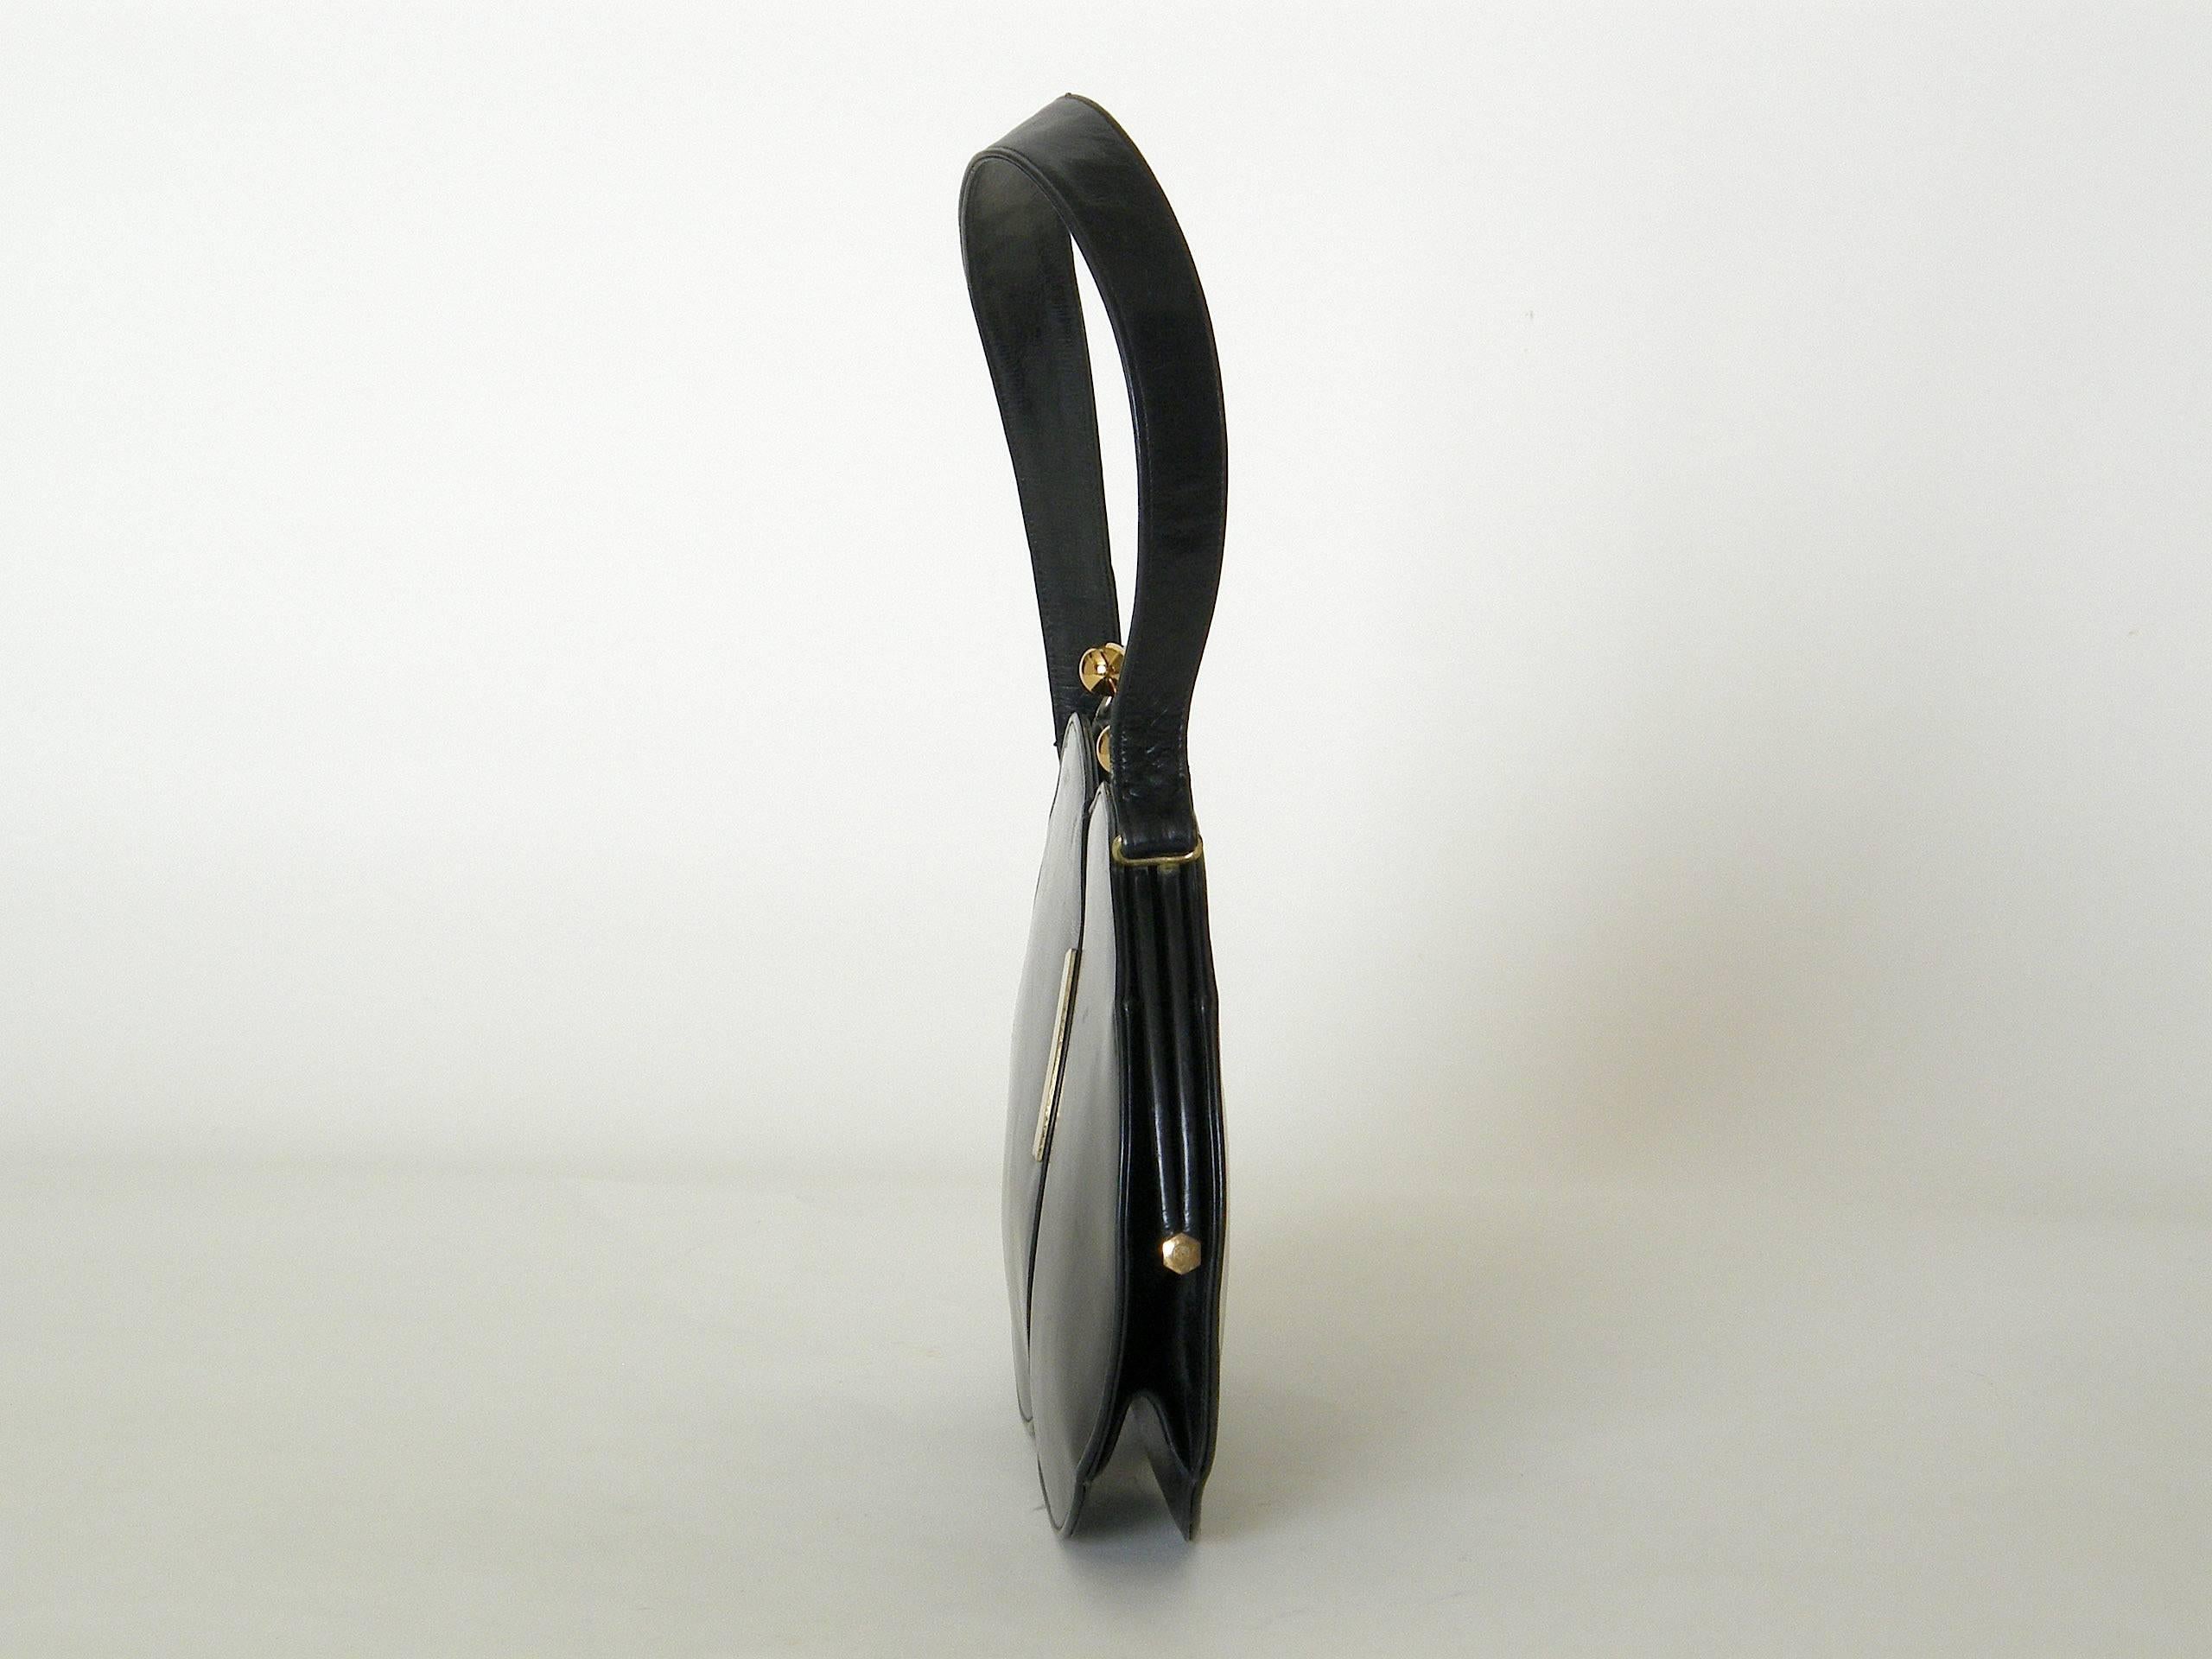 This unusual black leather handbag has an almost cartoon-like design. It looks like two overlapping bubbles with a shiny highlight on the edge of the front bubble. The kiss lock clasps are two tone with silver and gold plating. Though the bag